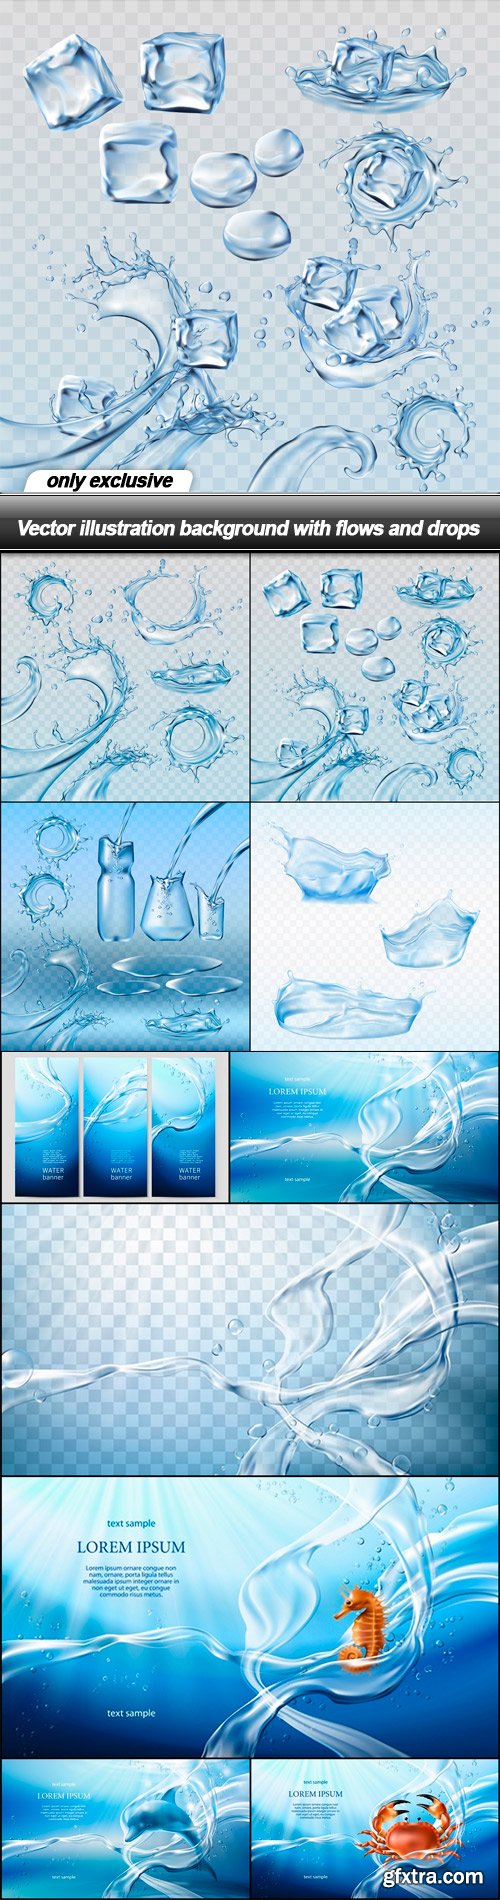 Vector illustration background with flows and drops - 10 EPS